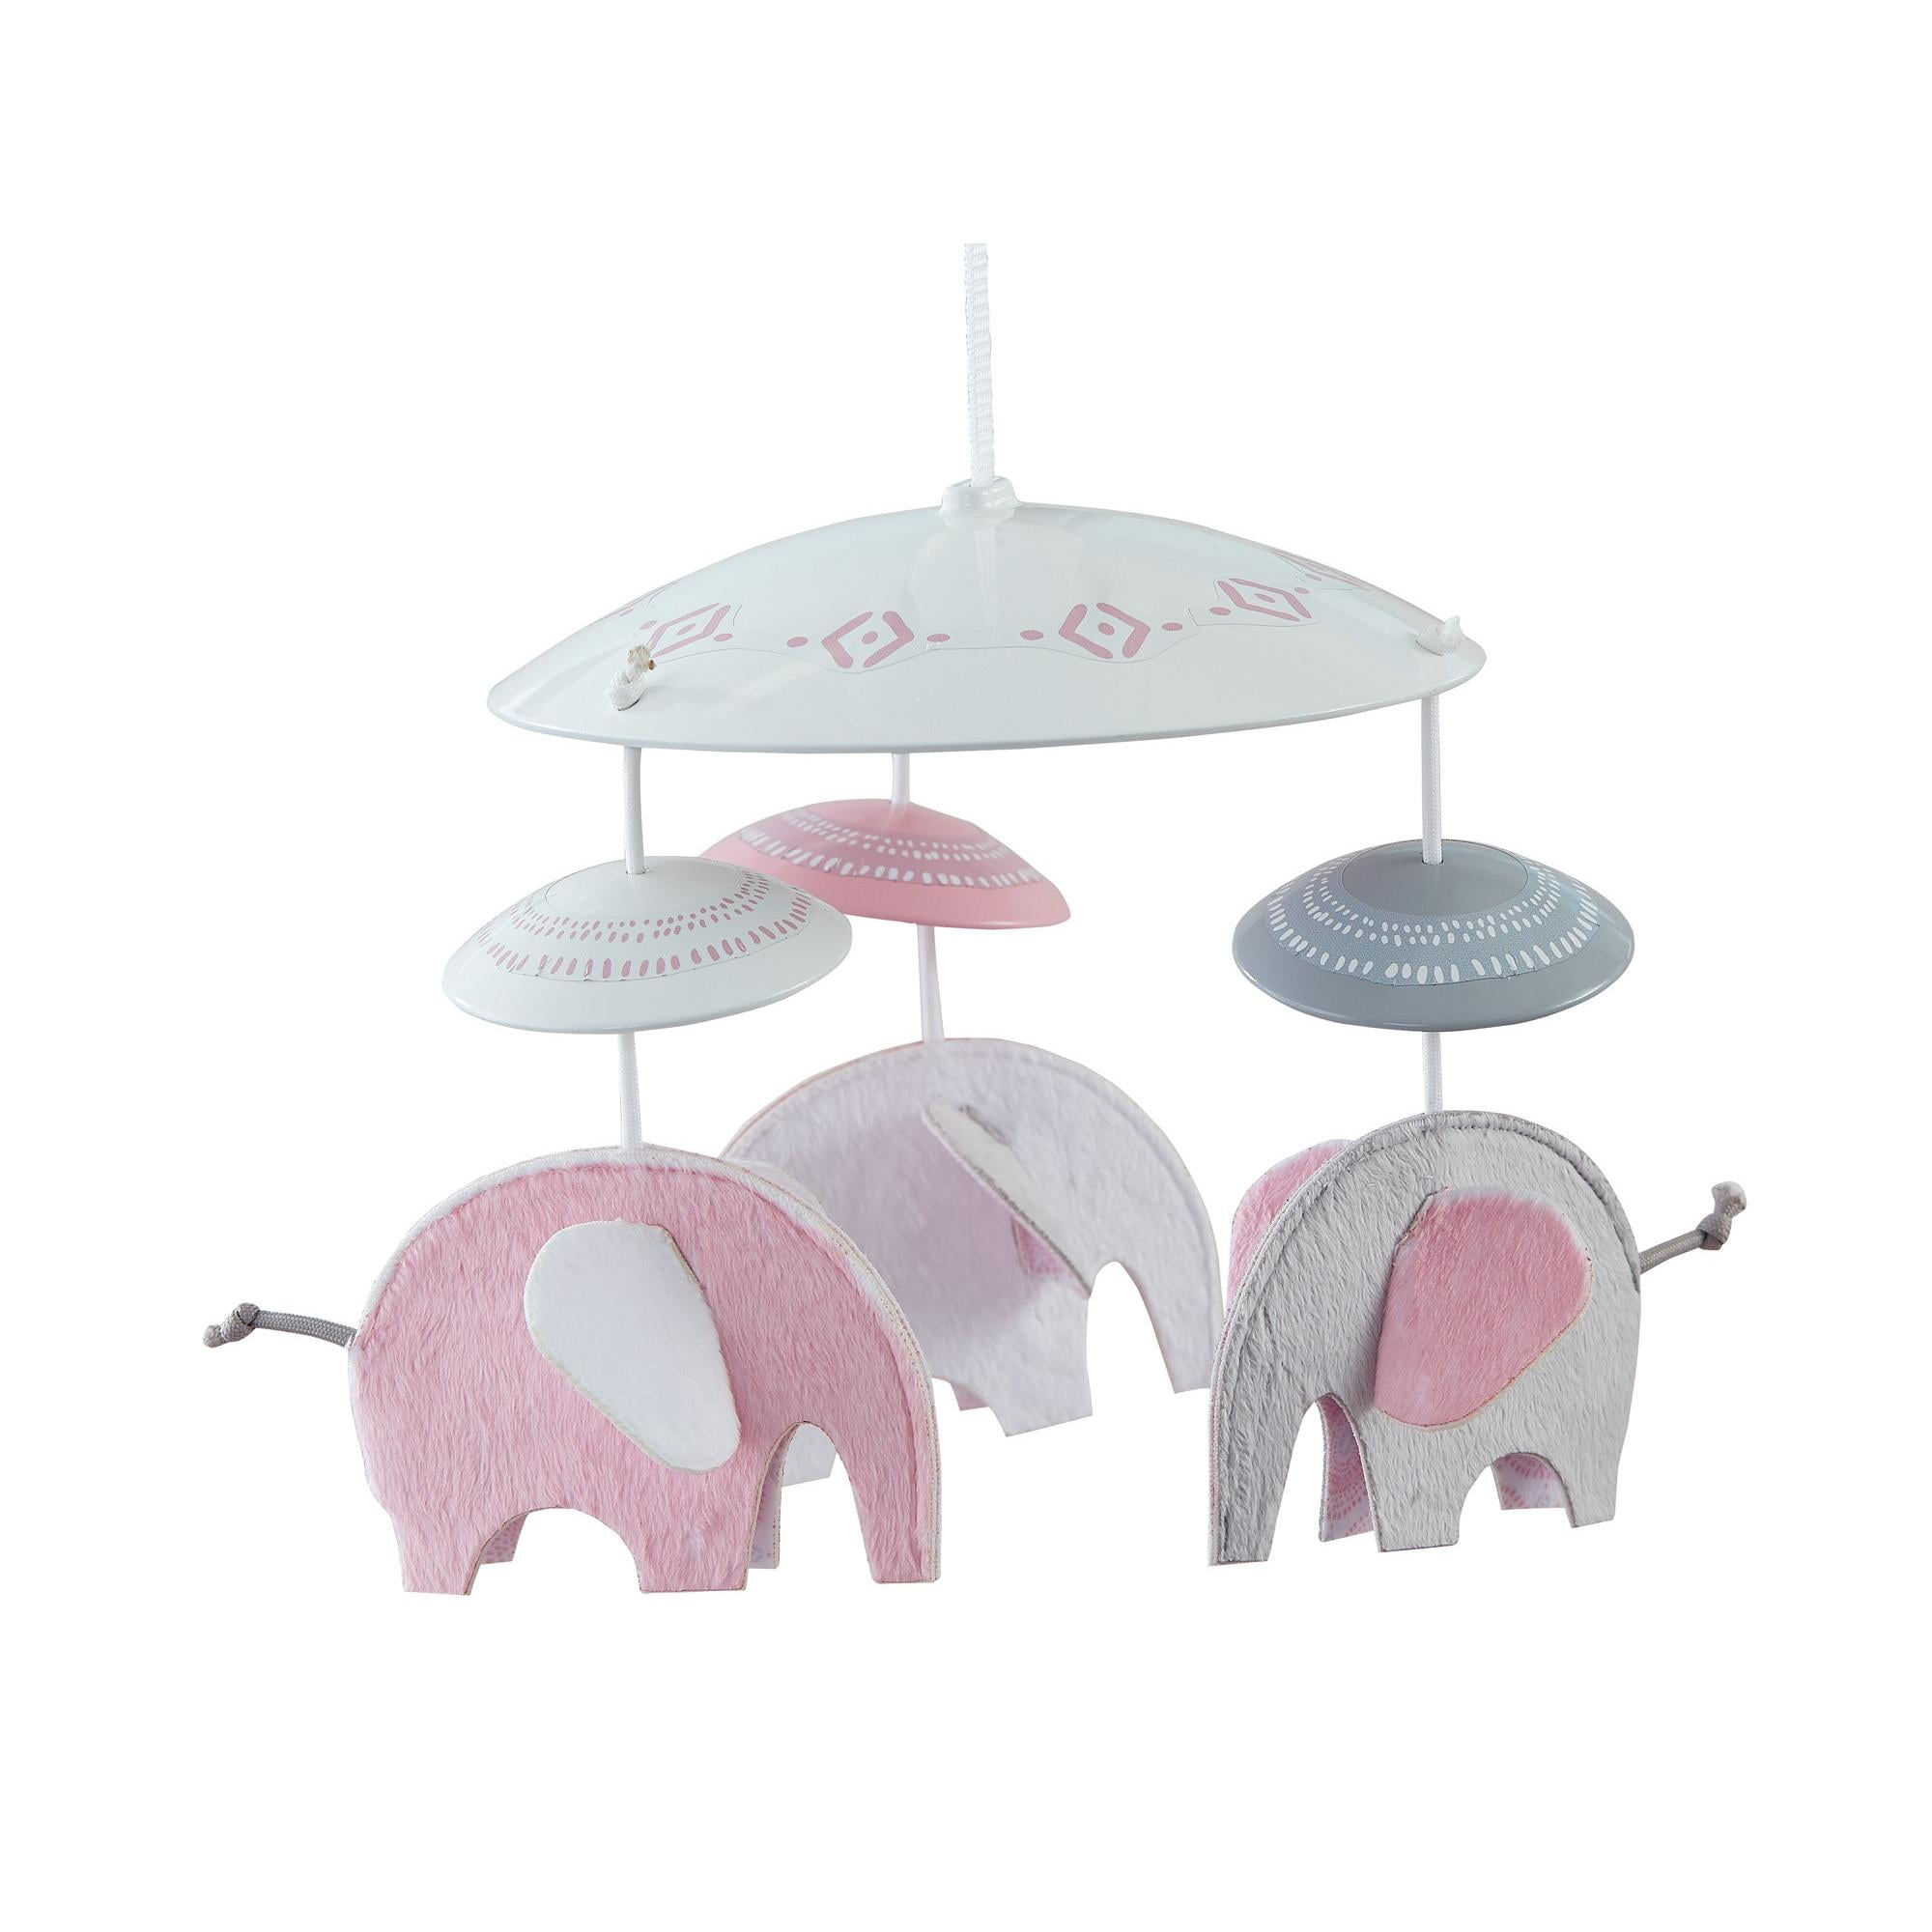 fisher price swing pink elephant